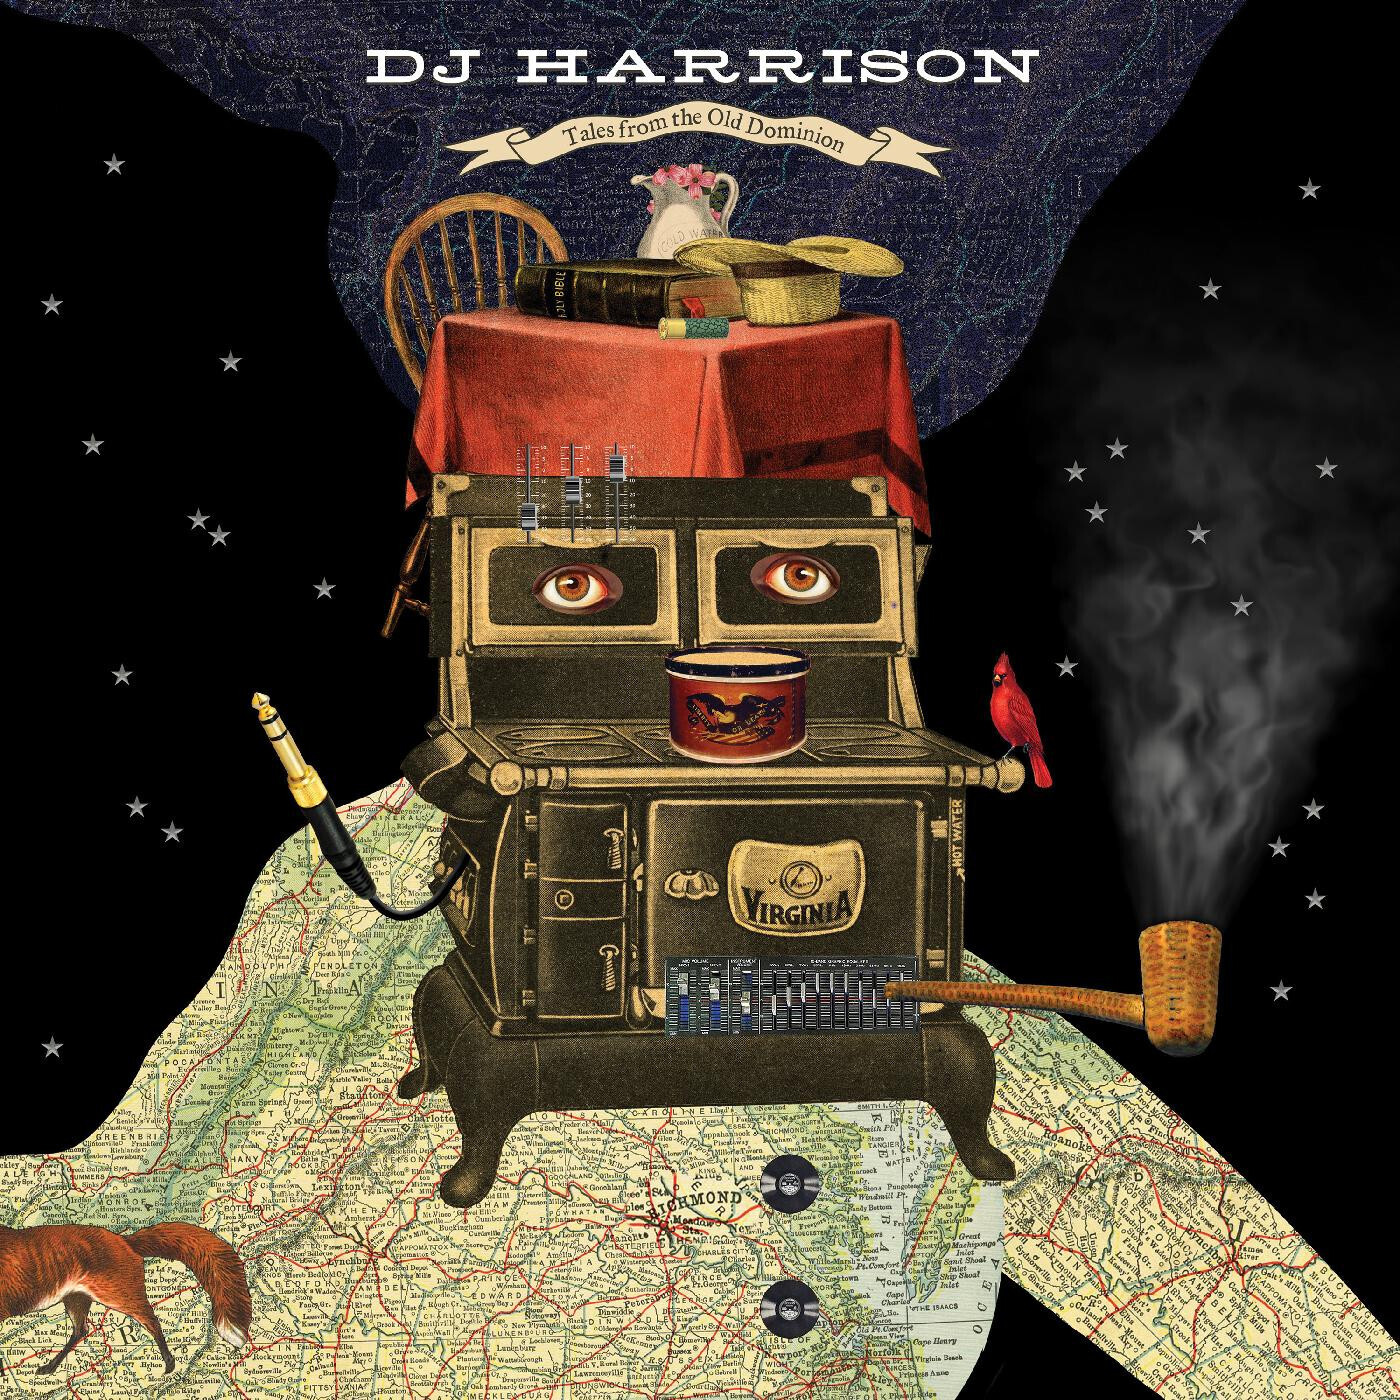 DJ Harrison "Tales from the Old Dominion"